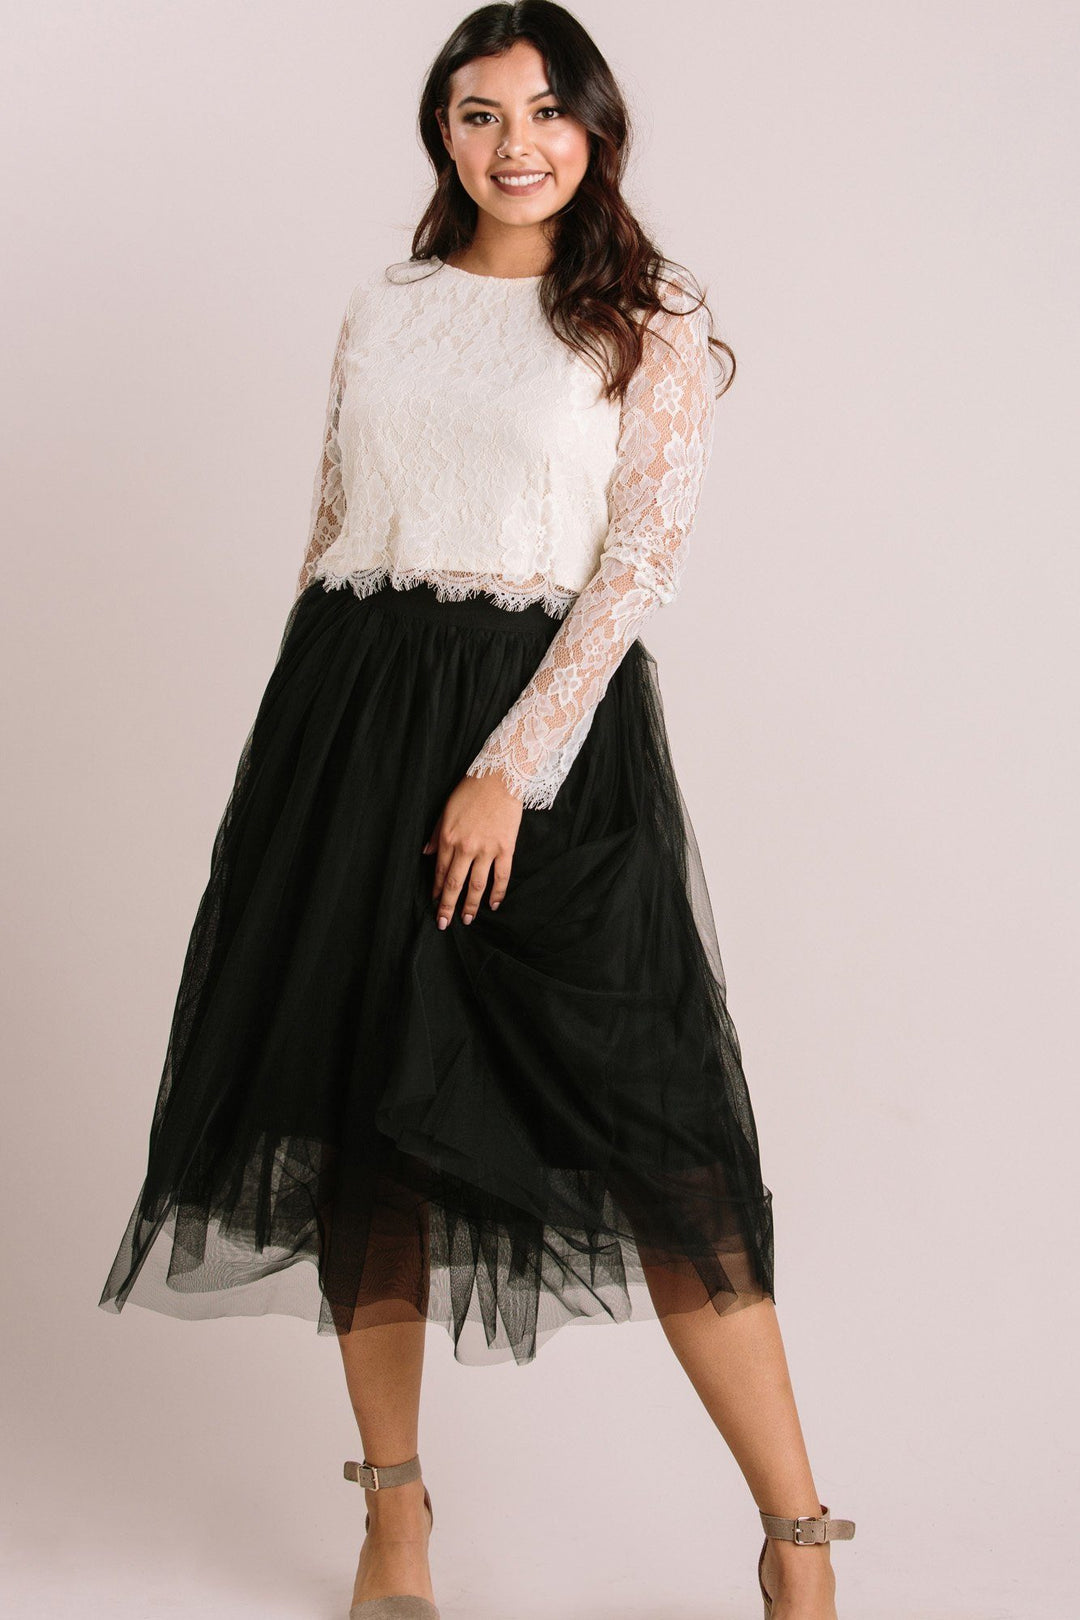 Inside Out :: High-waisted comfort & Sheer tulle skirt - Wendy's